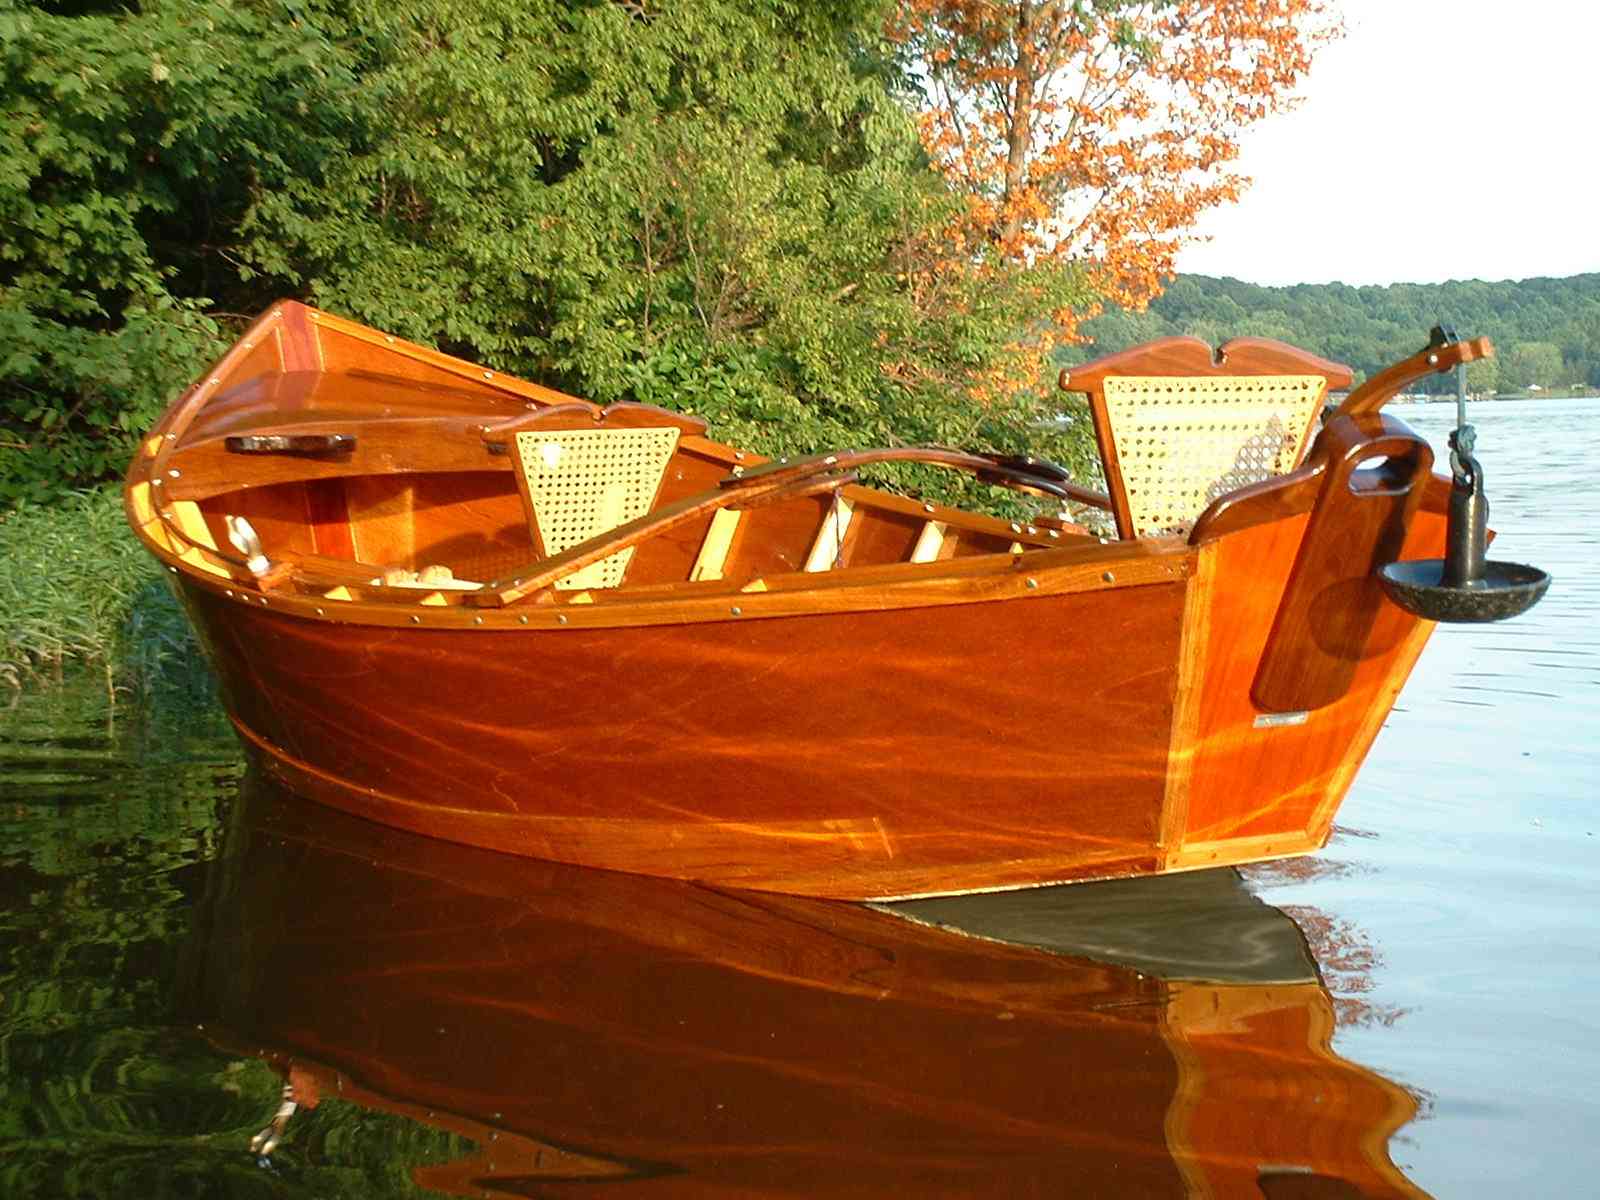 Building a Wooden Flyfishing Boat